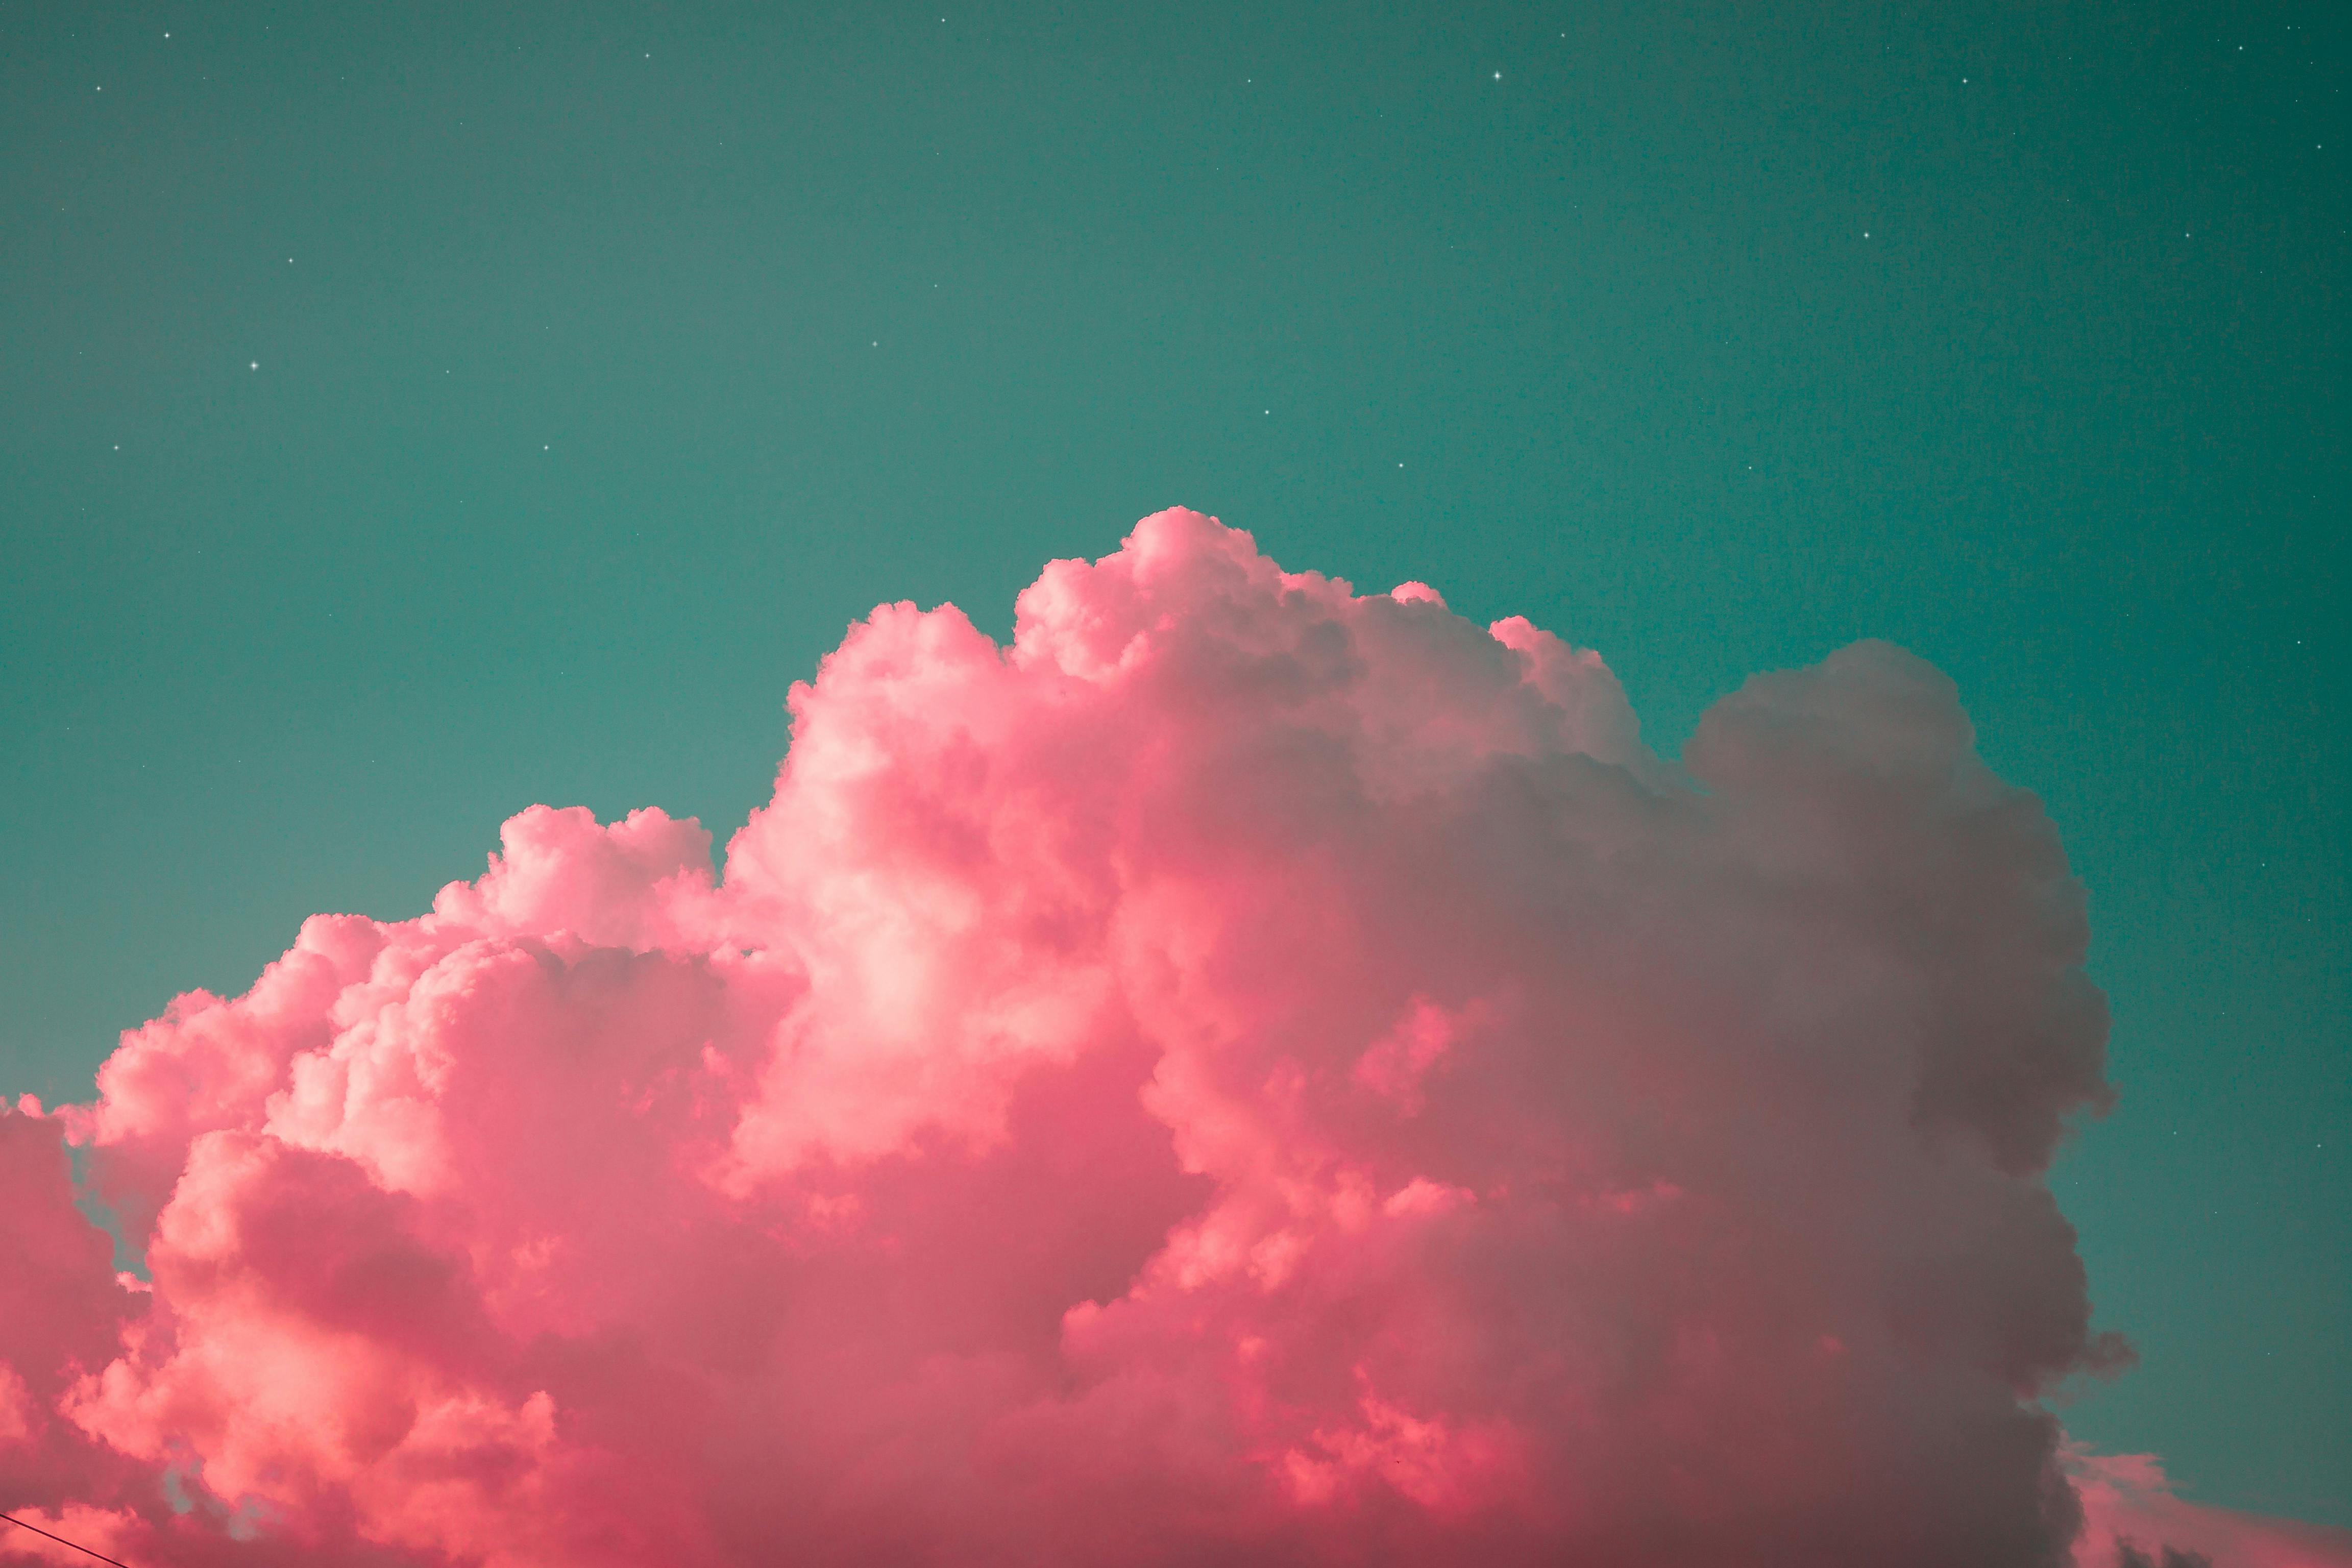 Pink Cloud Colorful Cloud Mobile Phone Wallpaper Background Wallpaper Image  For Free Download  Pngtree  Colorful clouds Pretty wallpapers tumblr Cloud  wallpaper